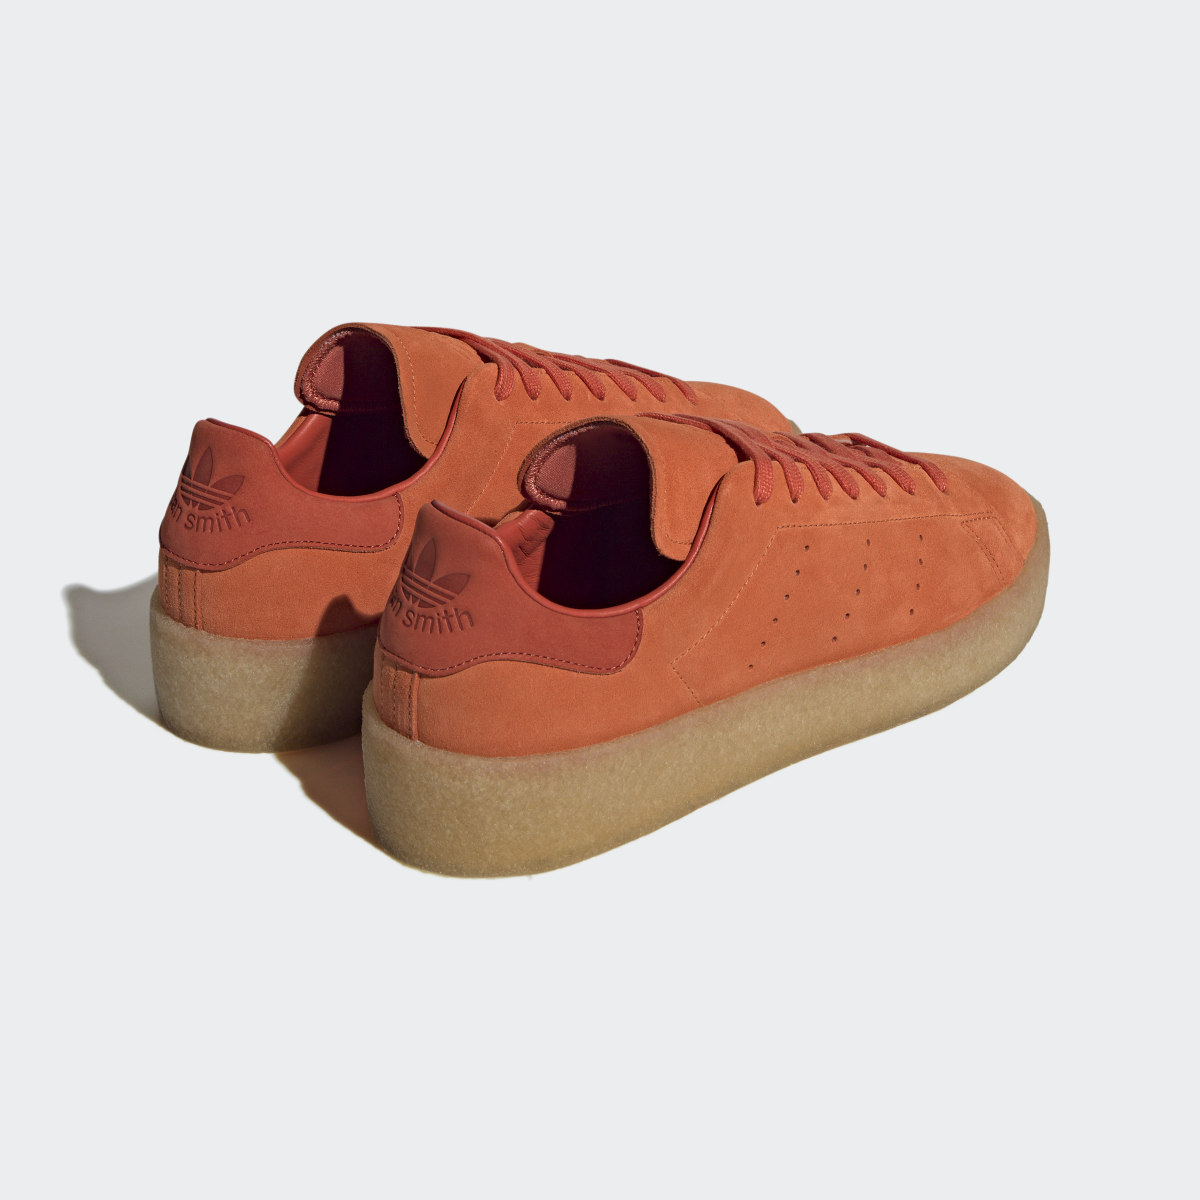 Adidas Stan Smith Crepe Shoes. 6